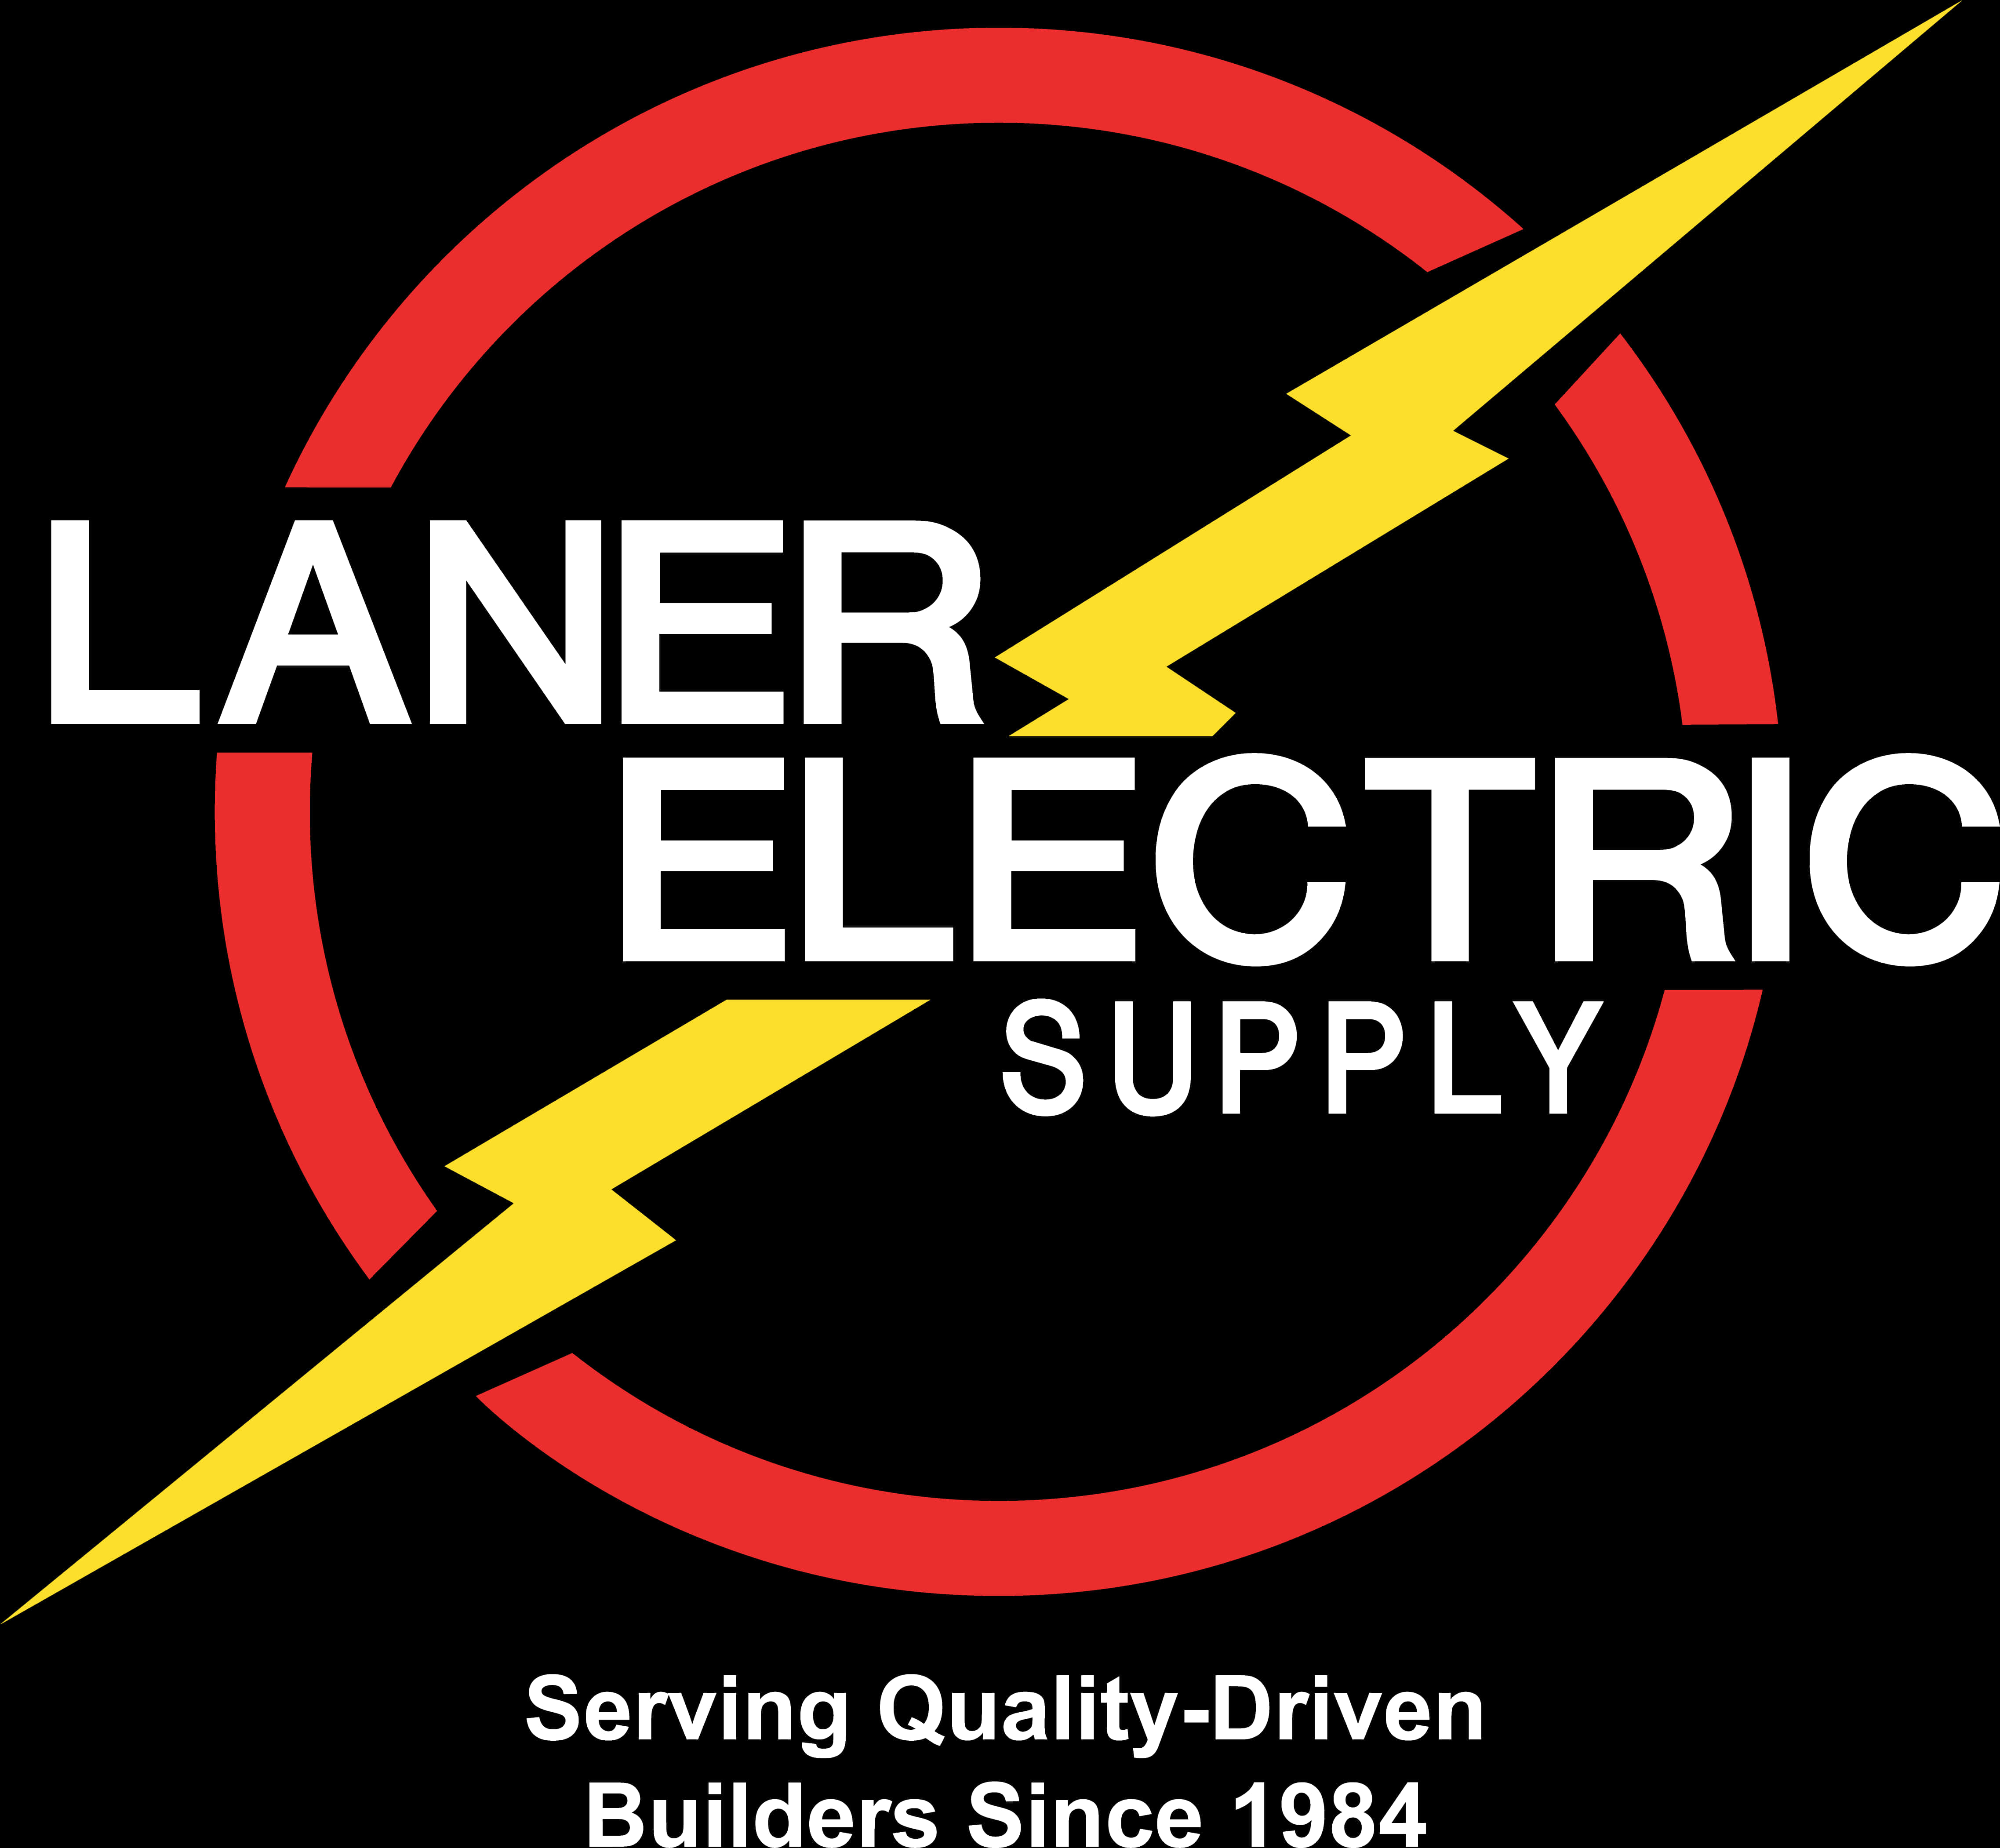 A Logo With Lightning Bolt In A Circle